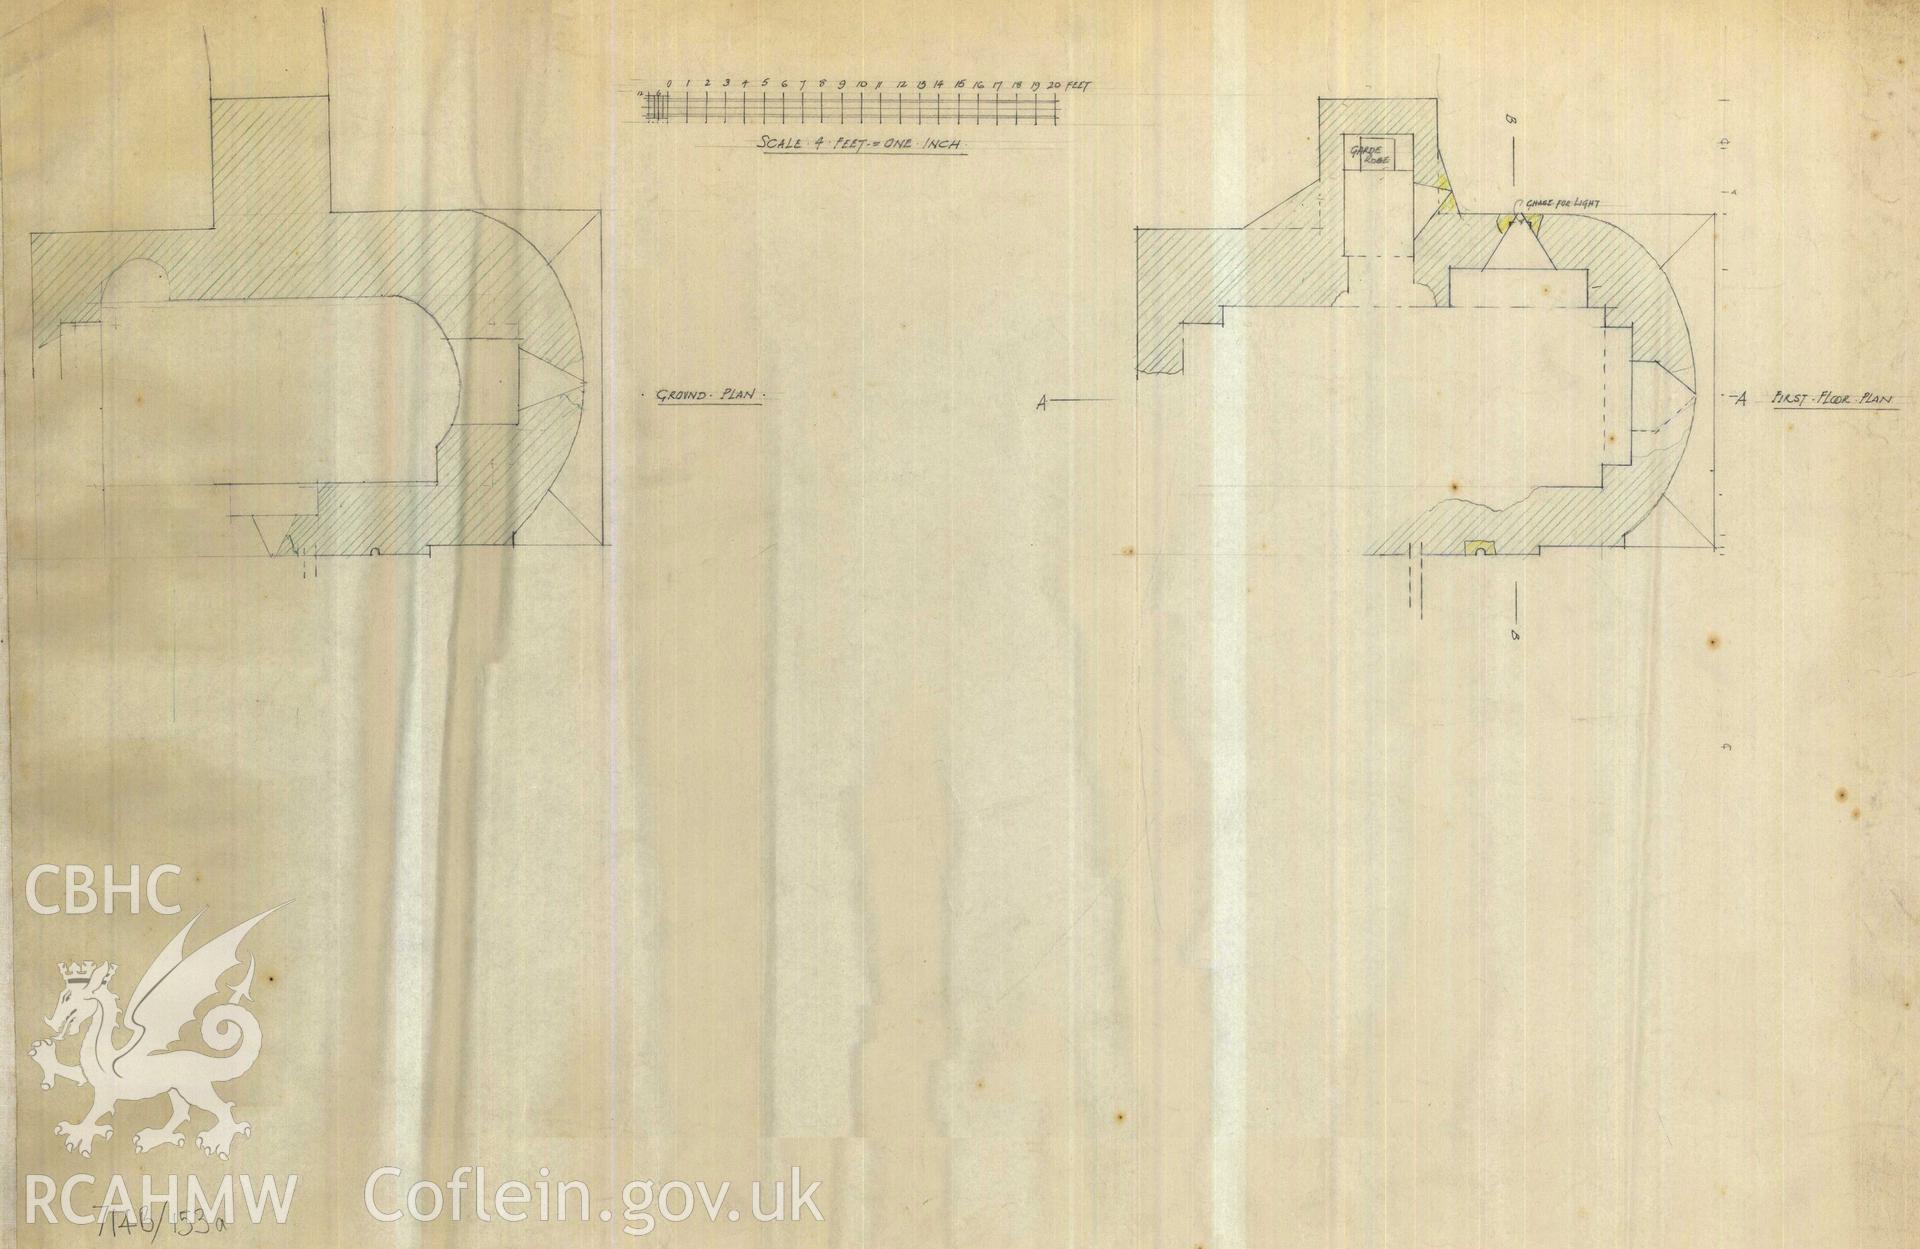 Cadw guardianship monument drawing of Caerphilly Castle. Dam, S gate, ground + upper plan. Cadw Ref. No:714B/153a. Scale 1:48.